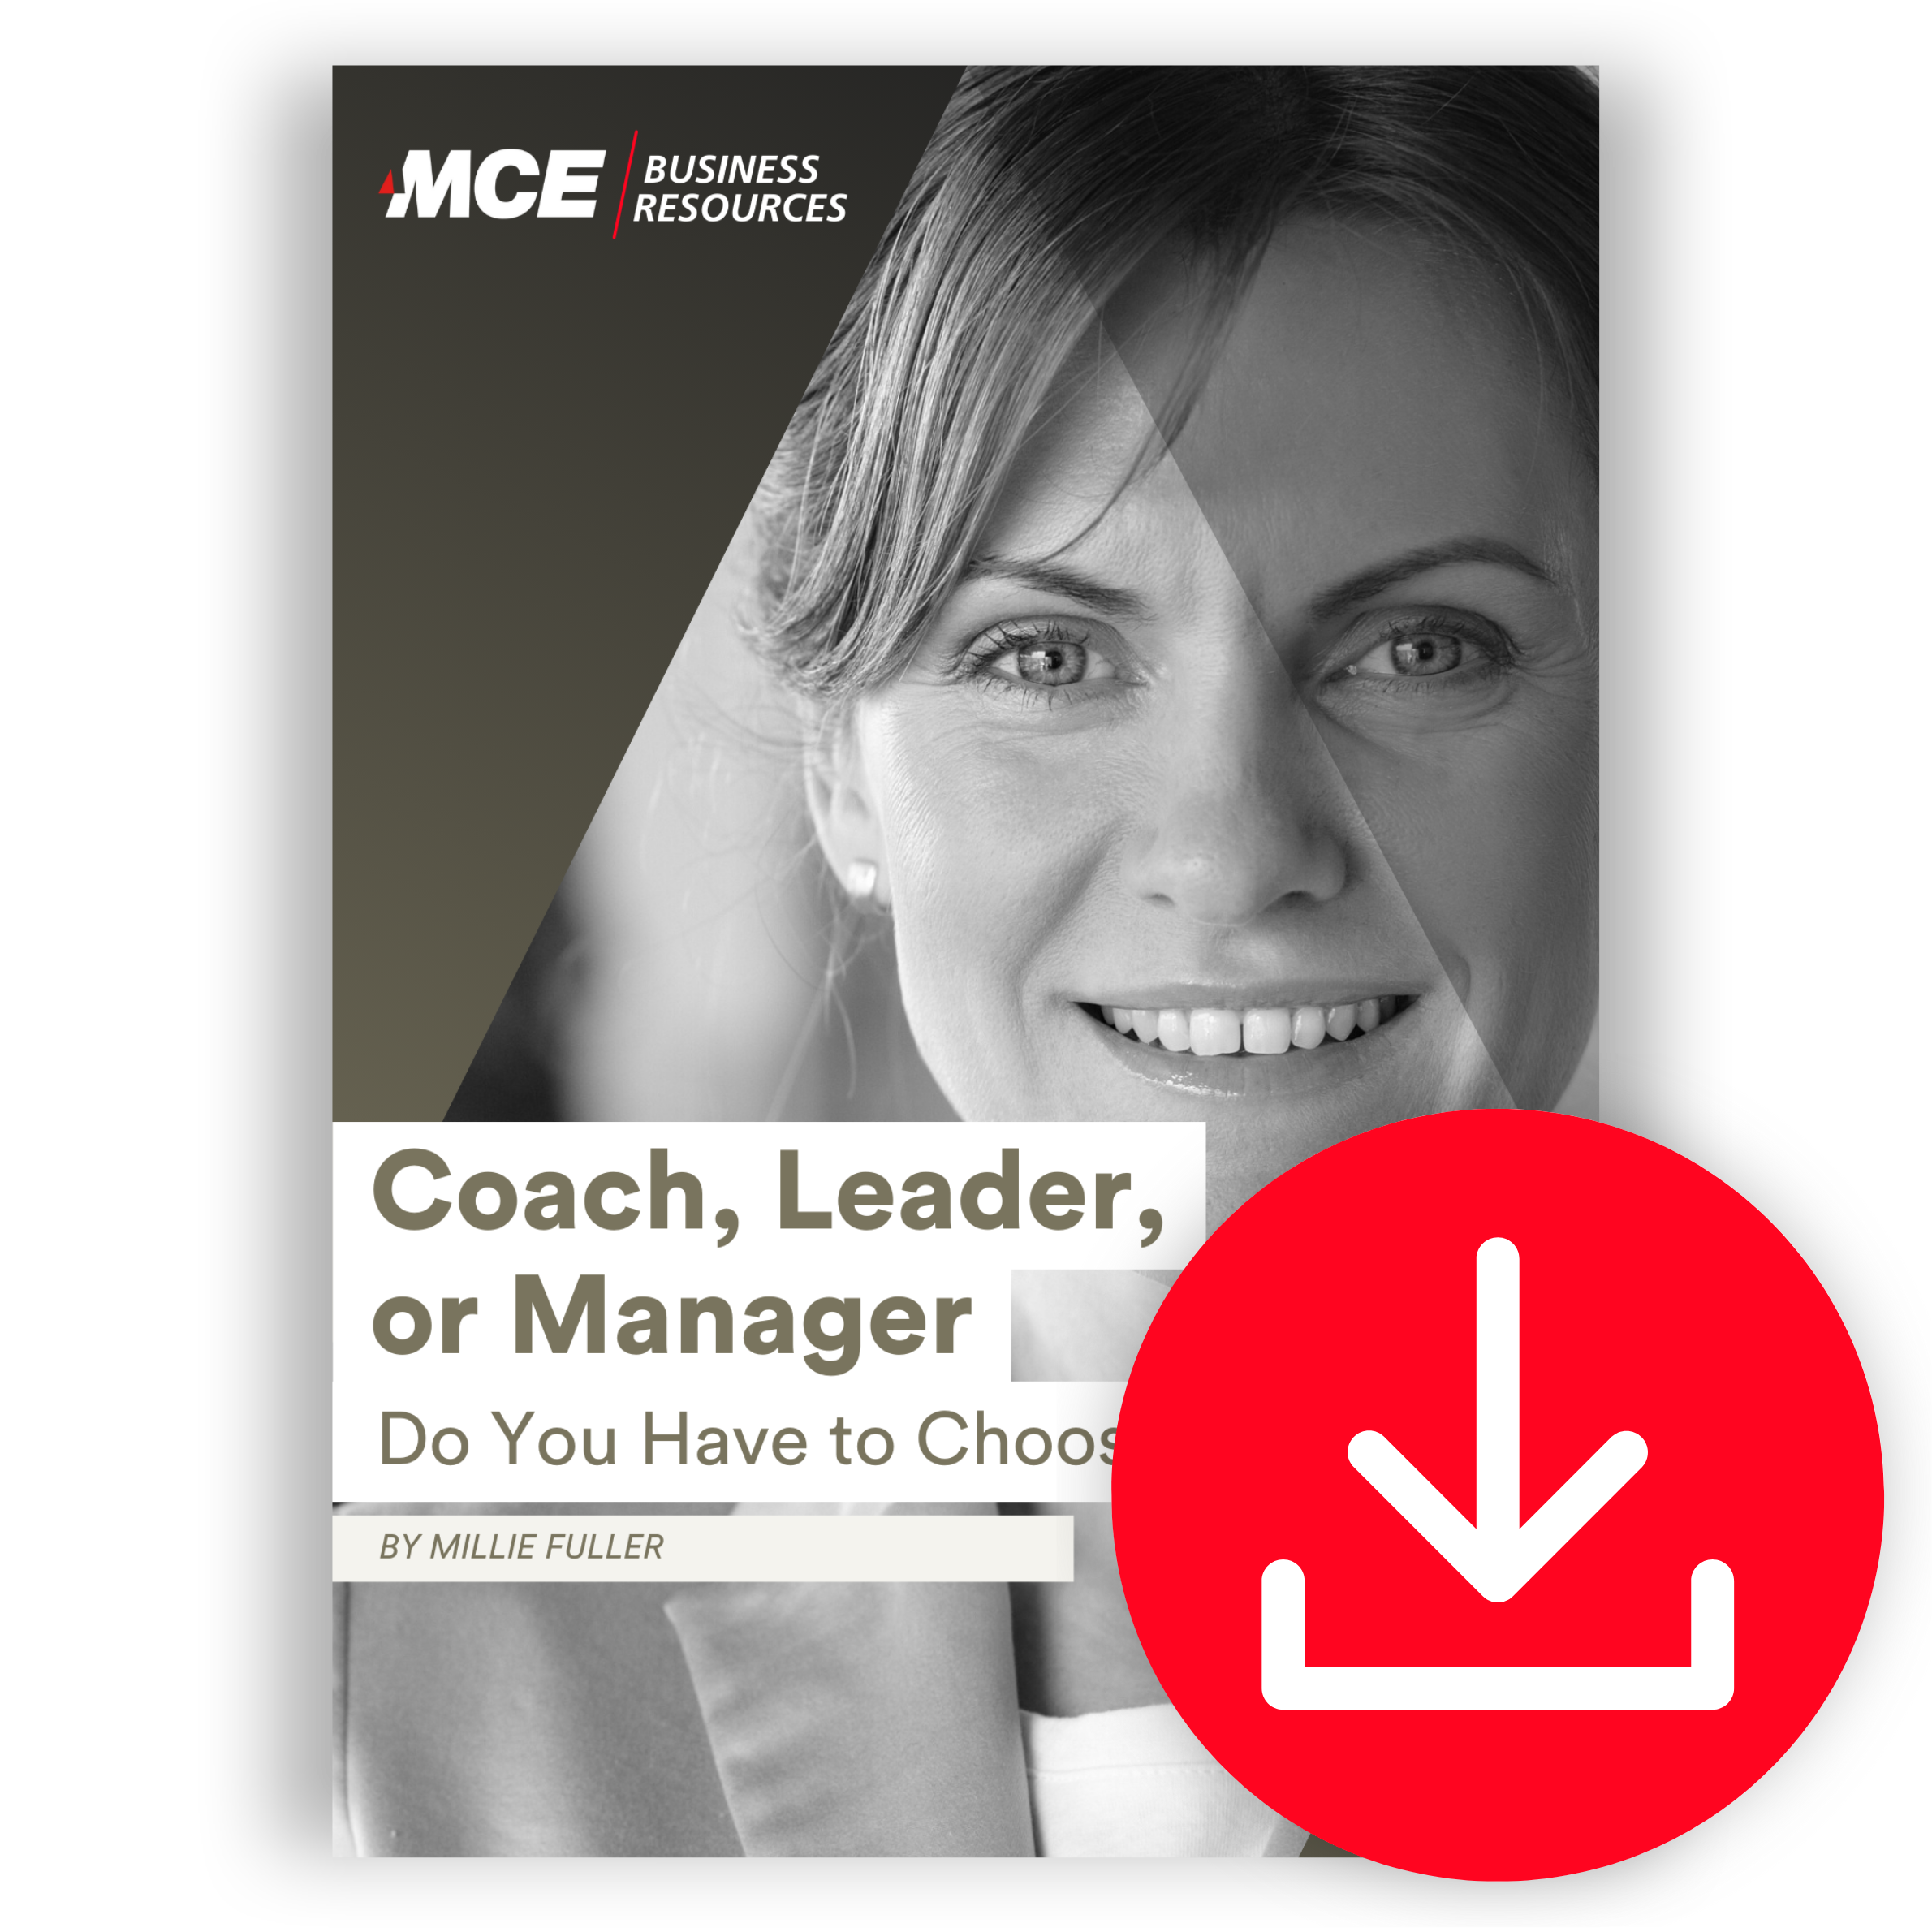 Coach, Leader, or Manager – Do You Have to Choose One?